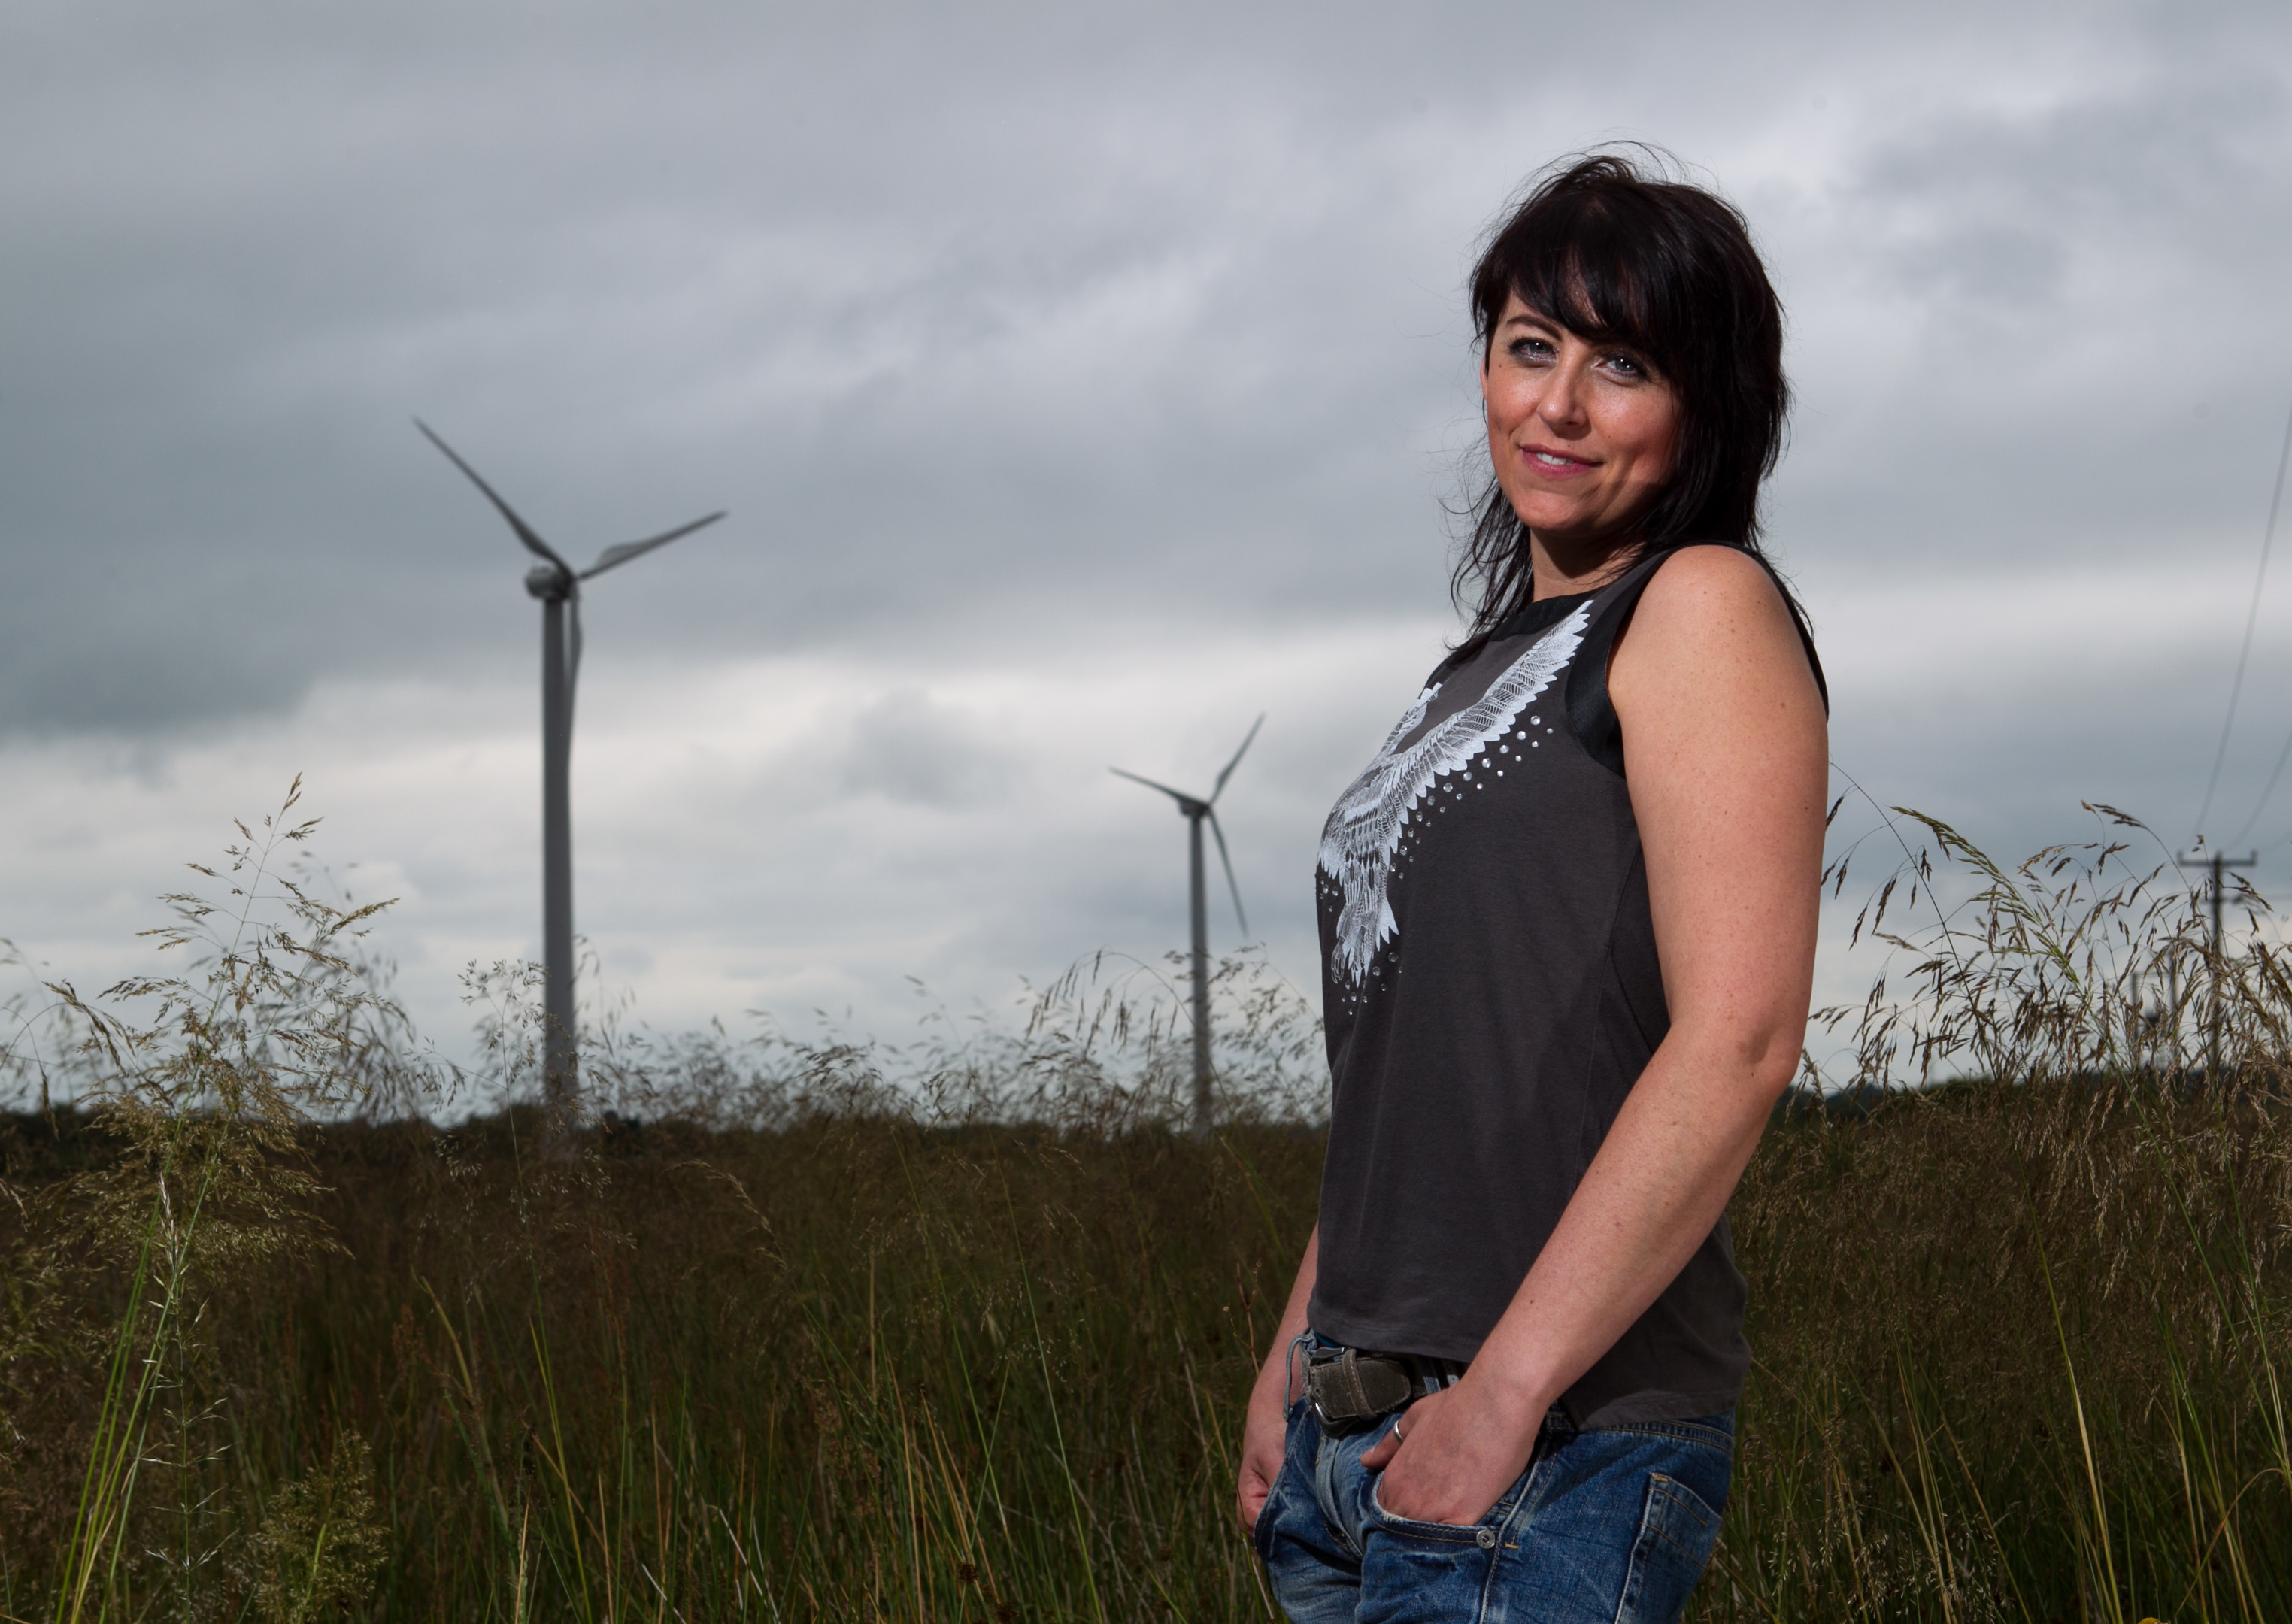 Alison Prior, who had a fear of wind turbines (Andrew Cawley / DC Thomson)